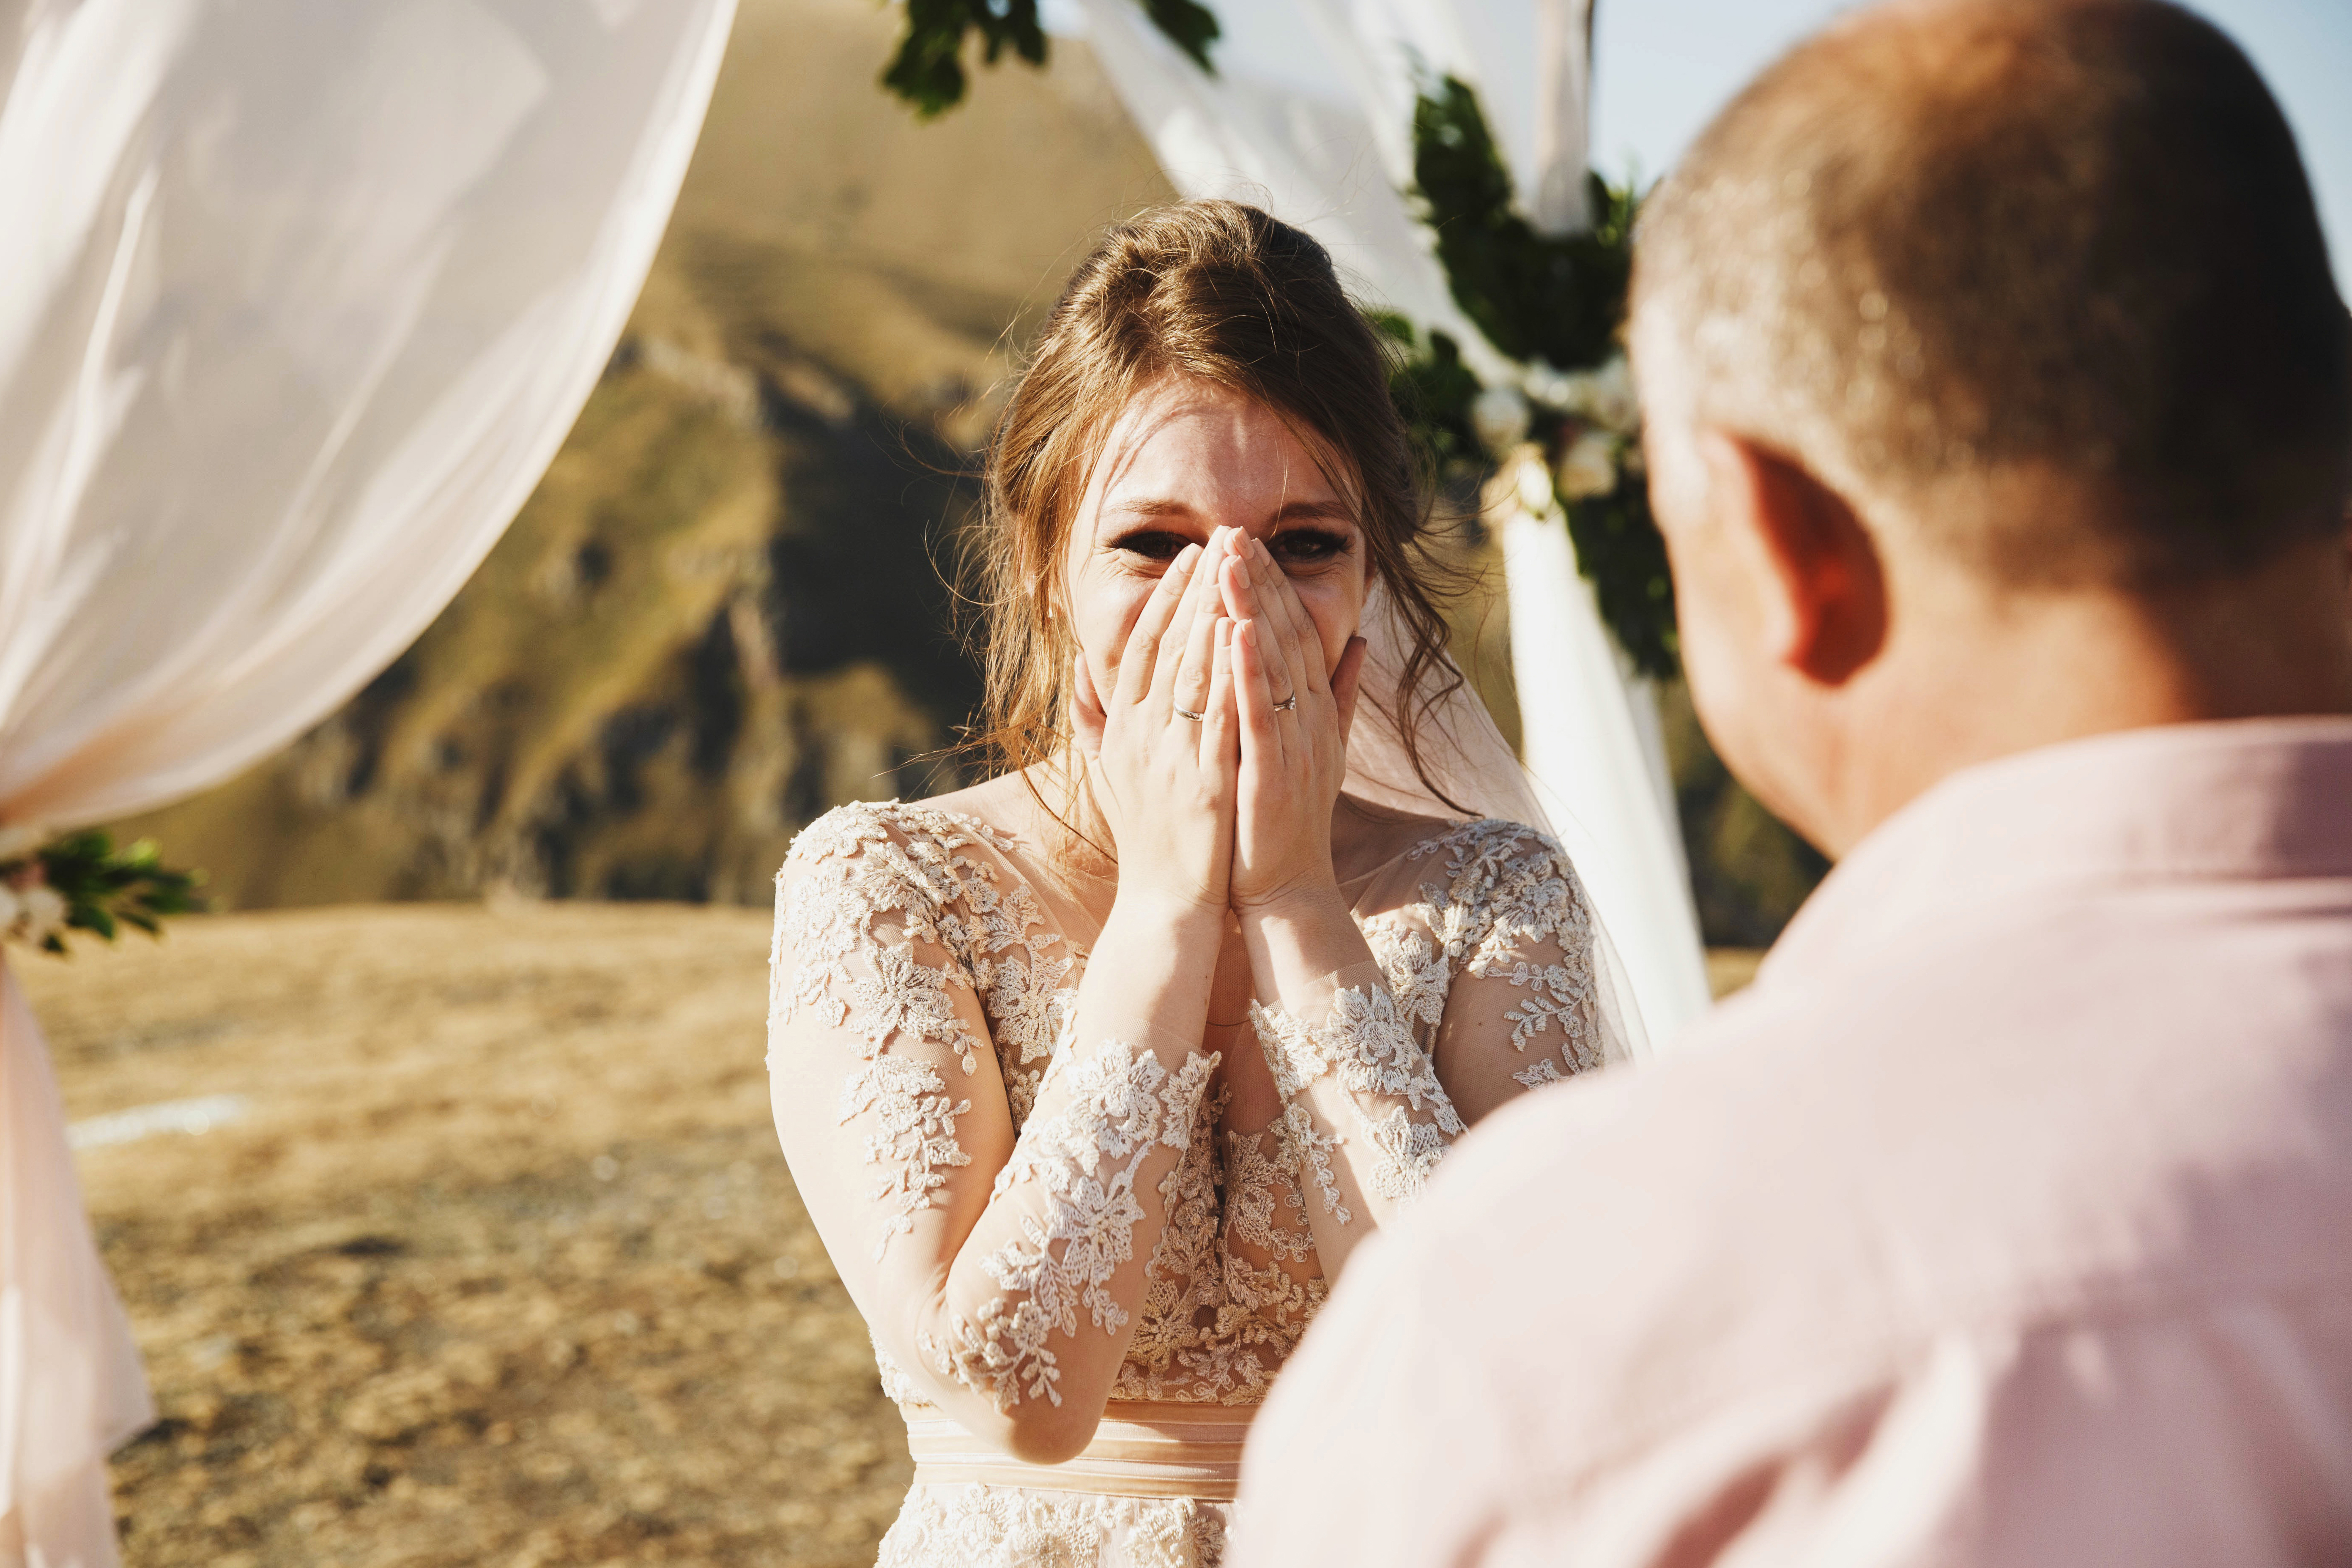 A bride looks at her father with her hands covering her mouth. | Source: Shutterstock